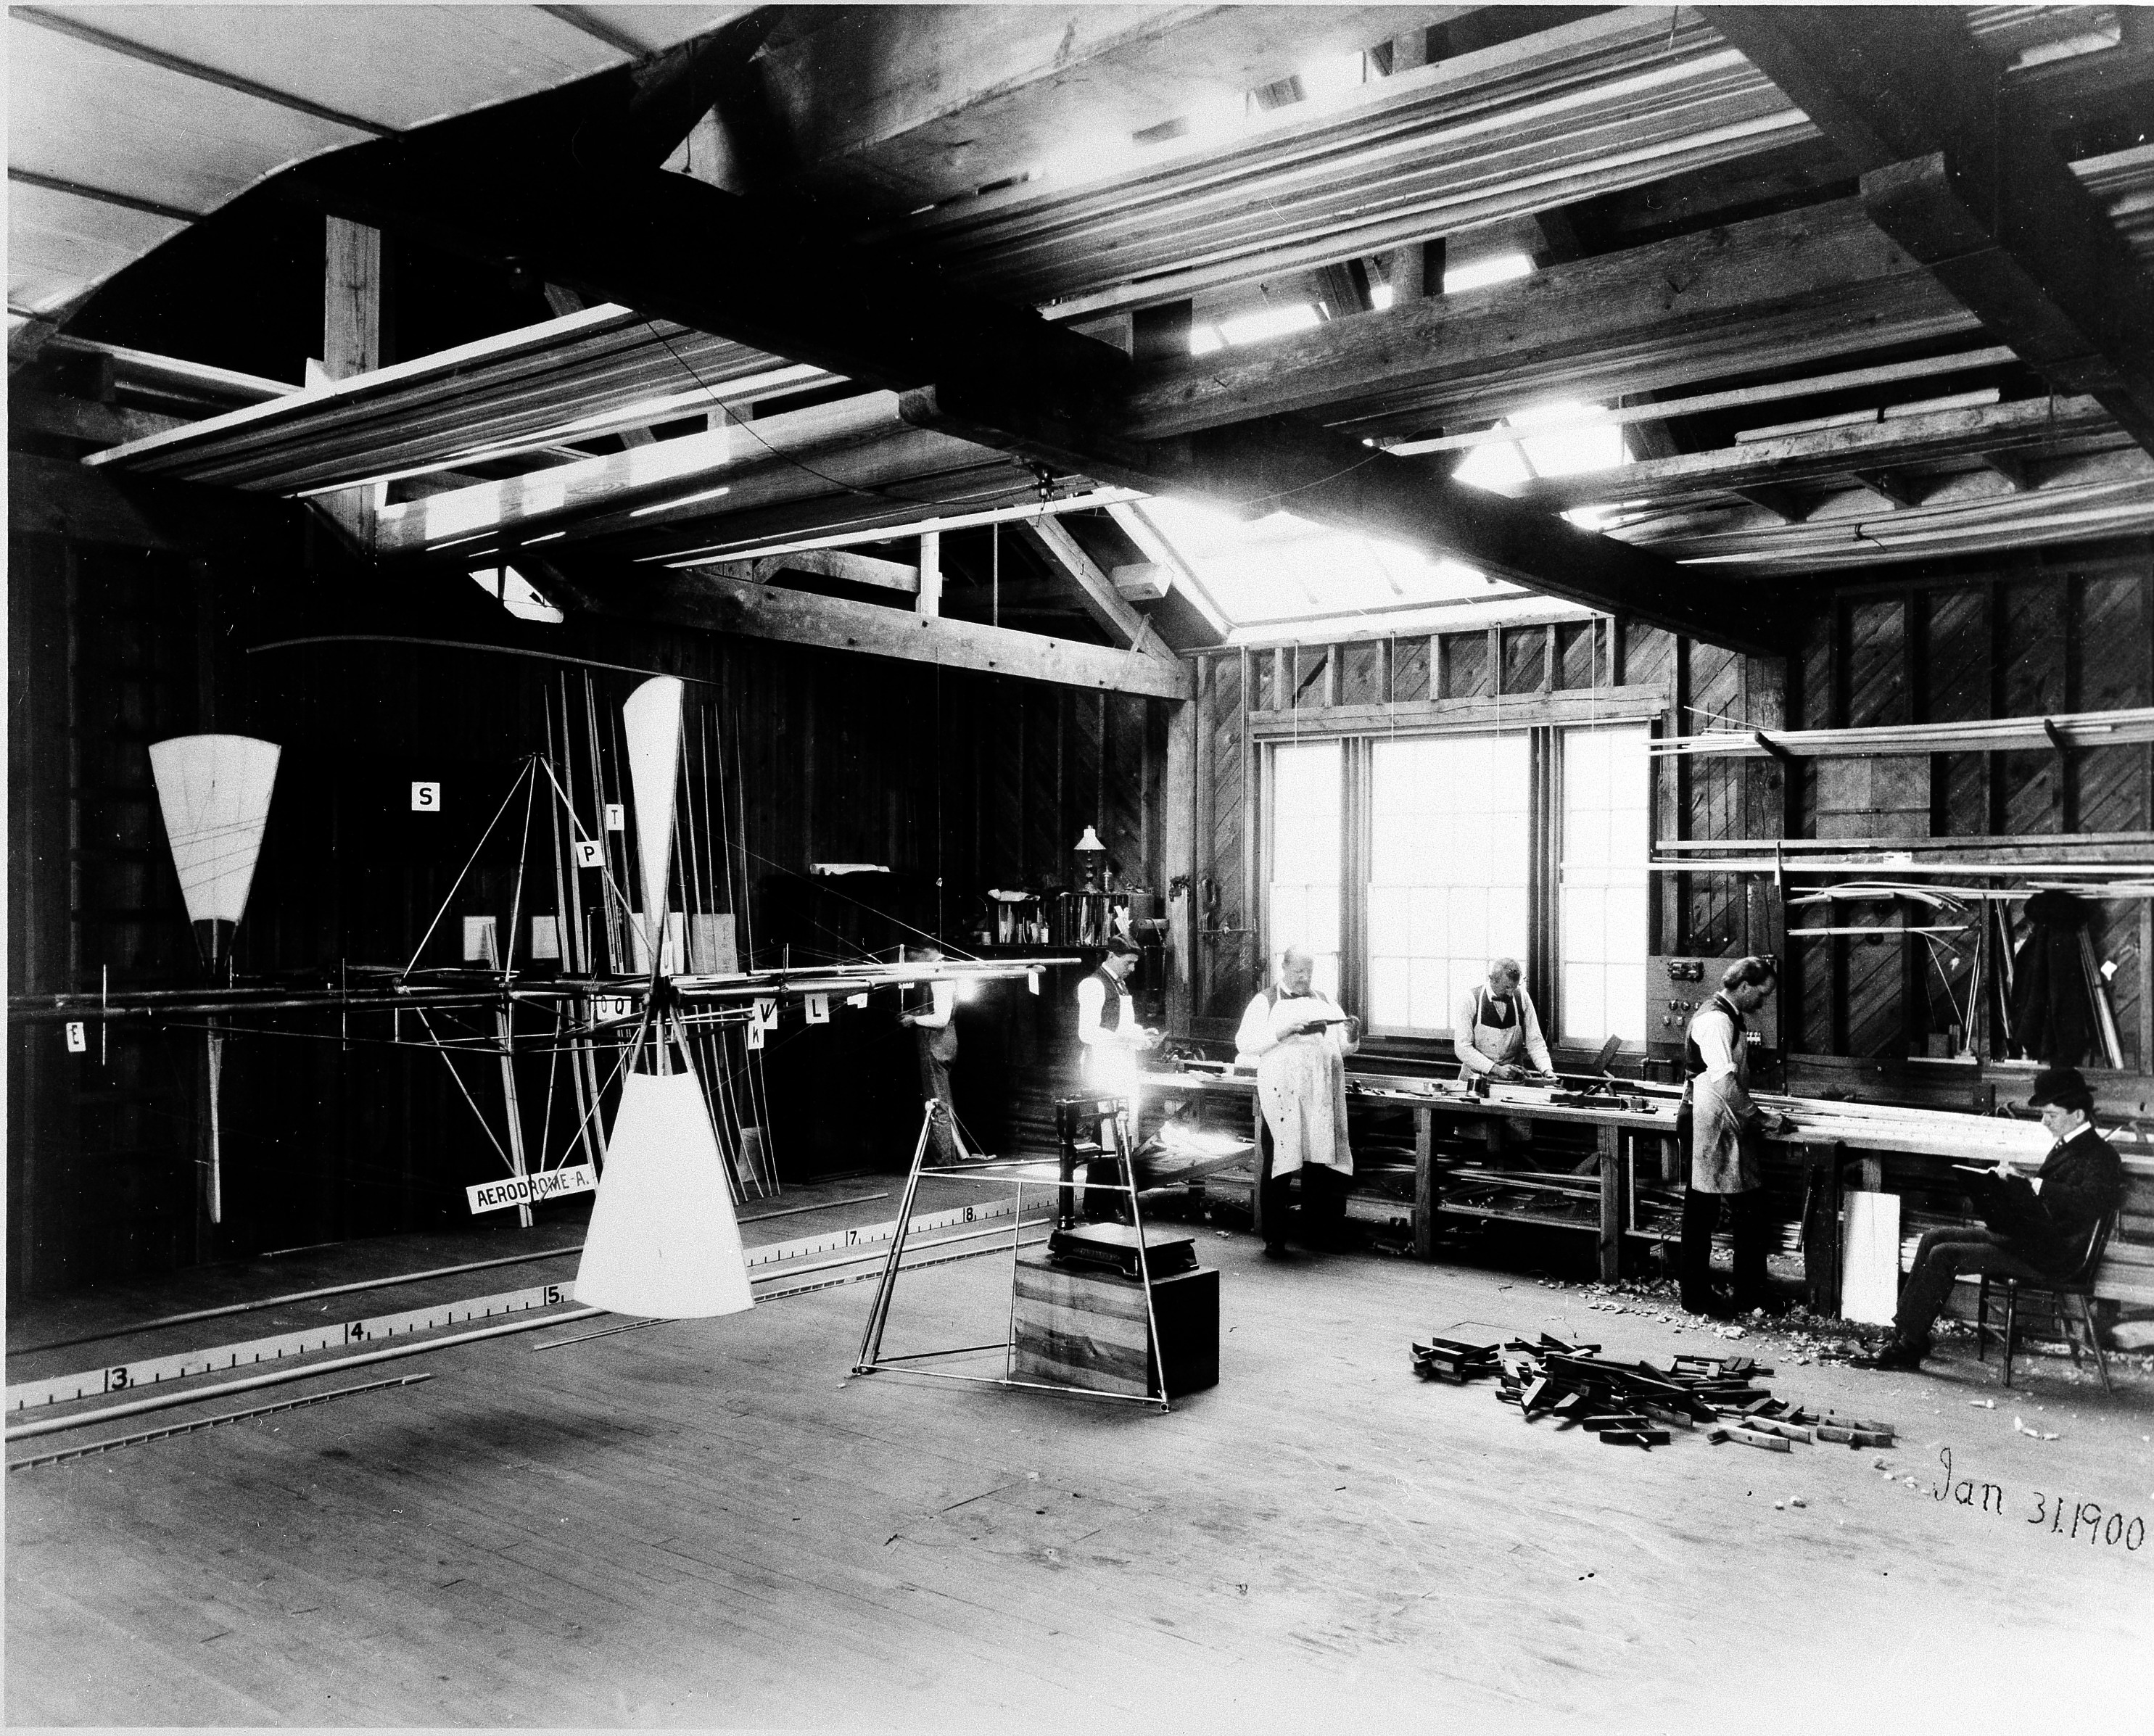 Samuel P. Langley's Aerodrome Shop in the South Shed